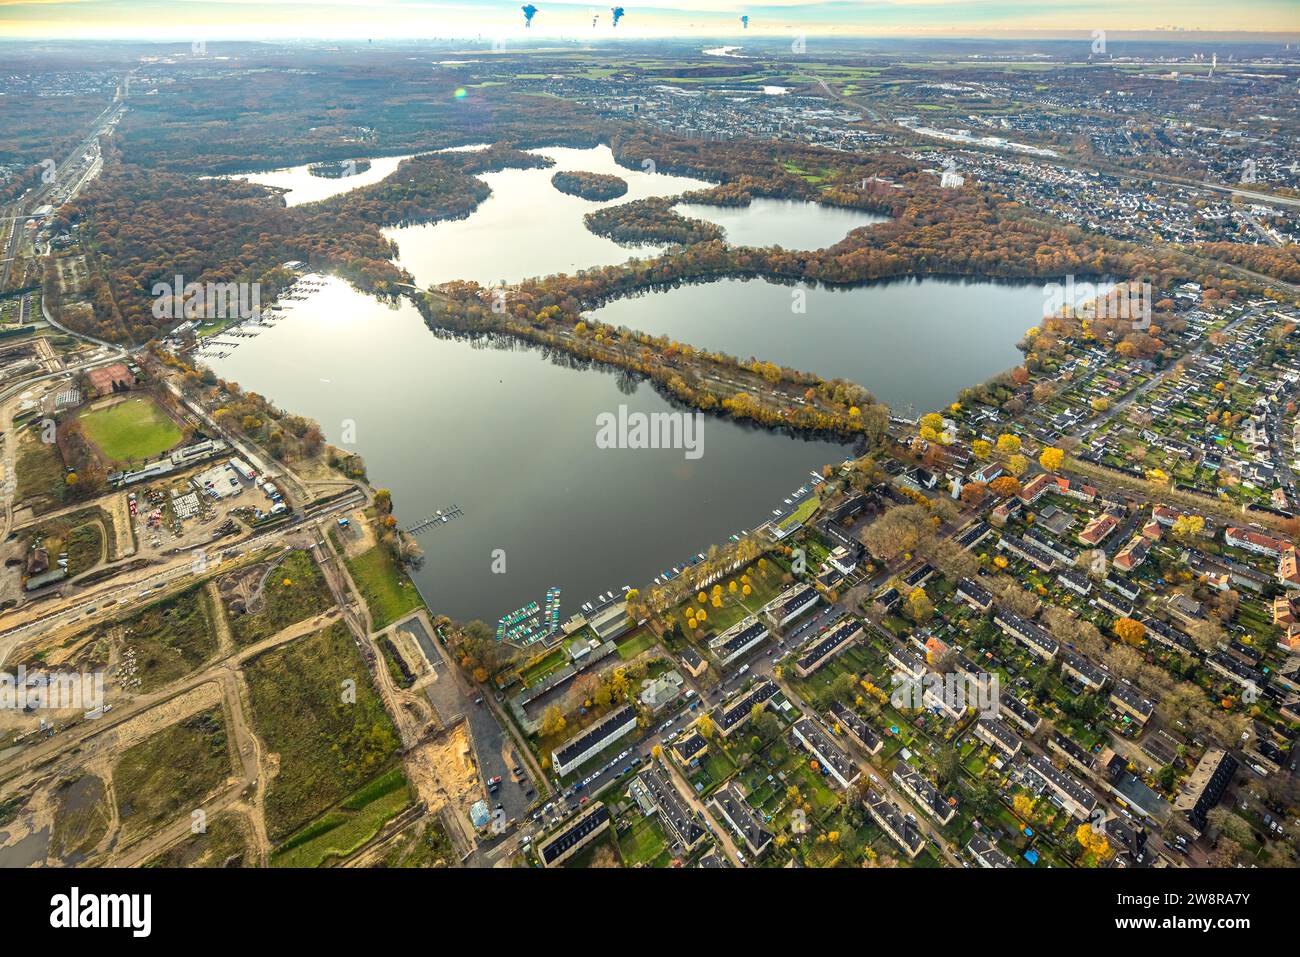 Aerial view, Sechs-Seen-Platte, recreation area, distant view with smoking cooling towers, surrounded by autumnal deciduous trees, Wedau, Duisburg, Ru Stock Photo